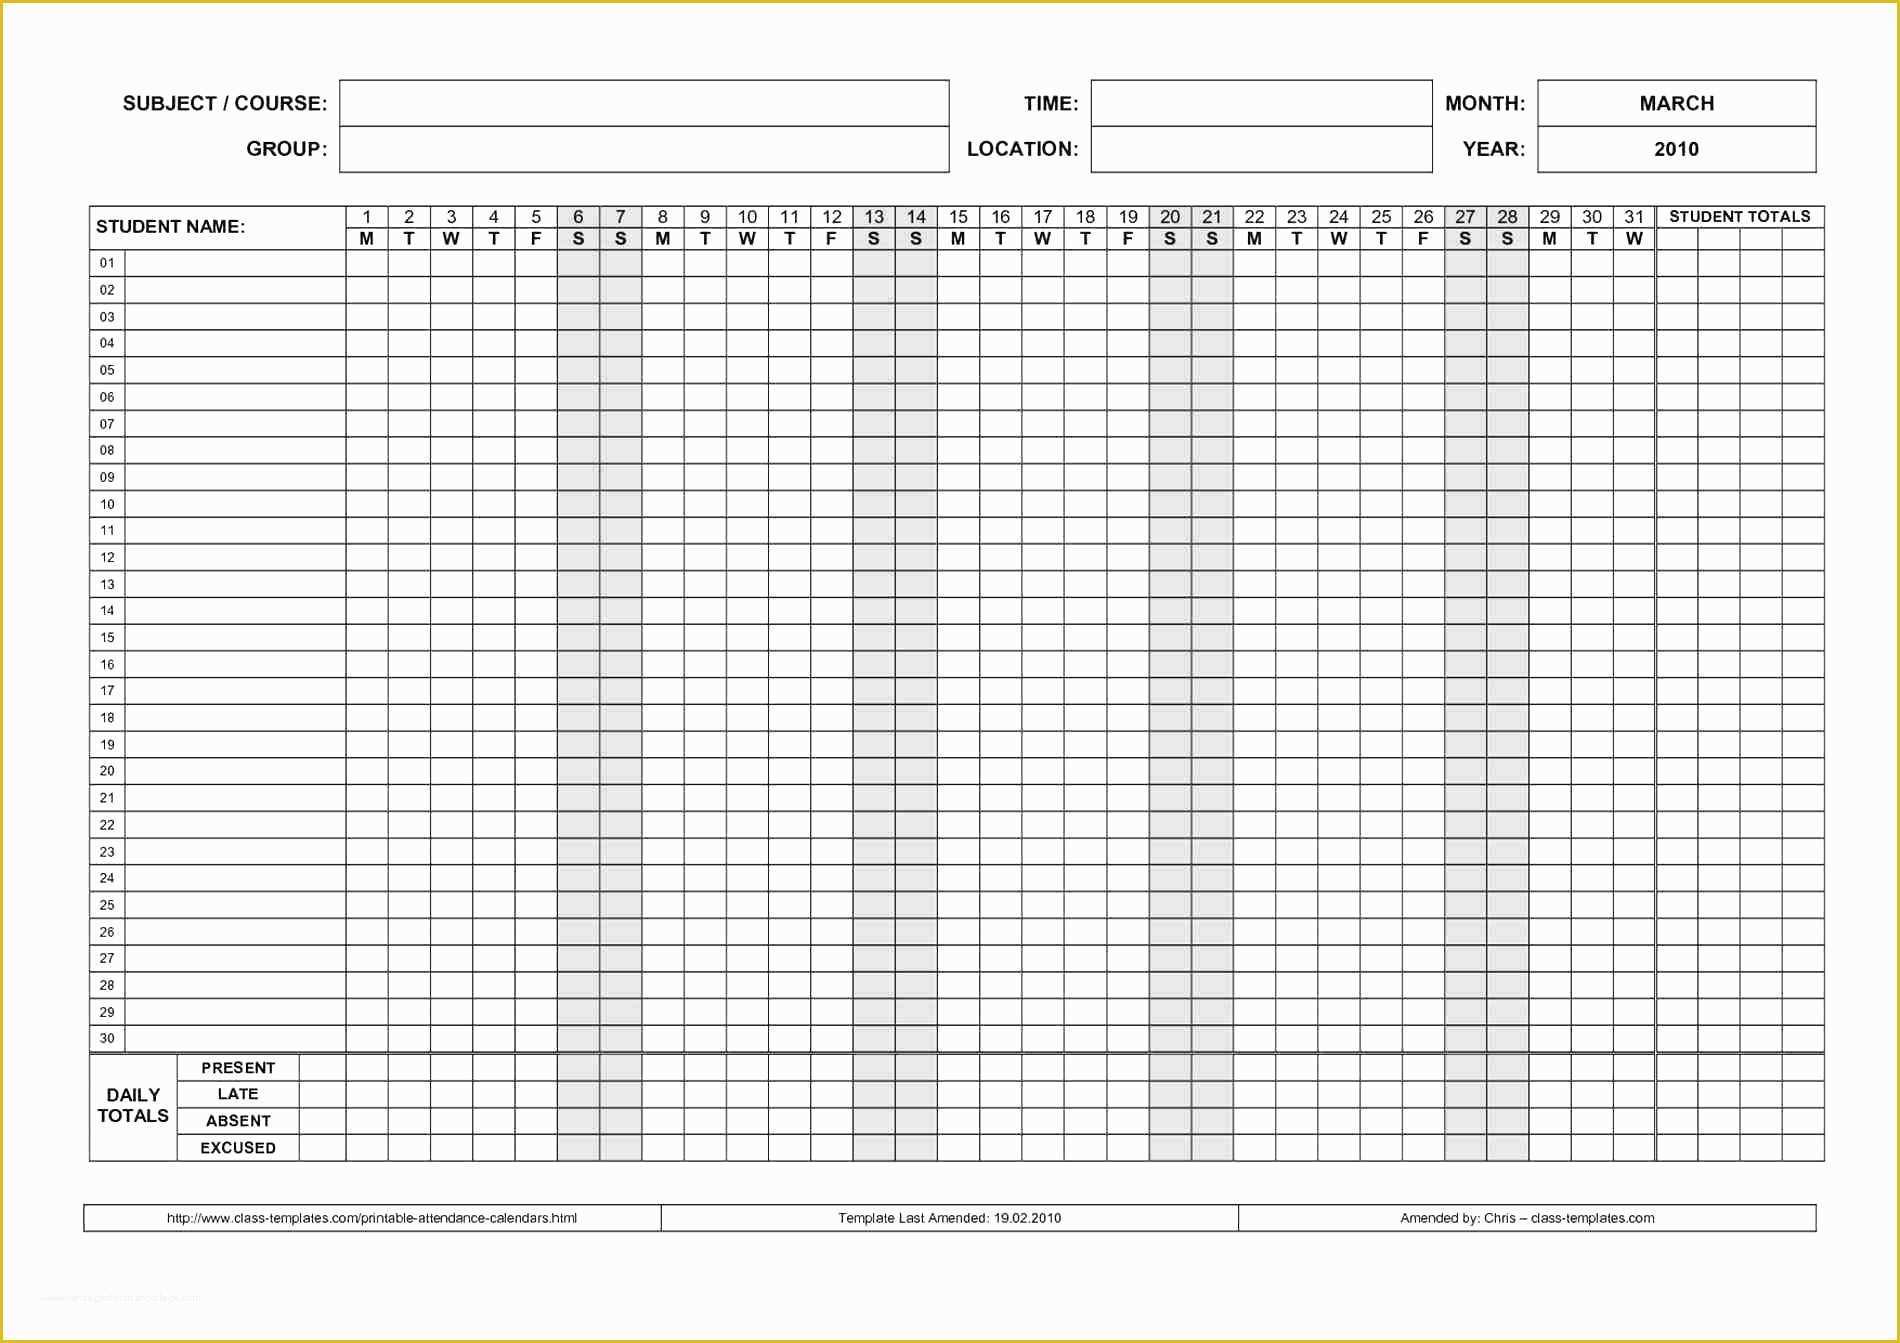 Free Annual Leave Spreadsheet Excel Template Of Best Free Annual Leave Planner Excel Template